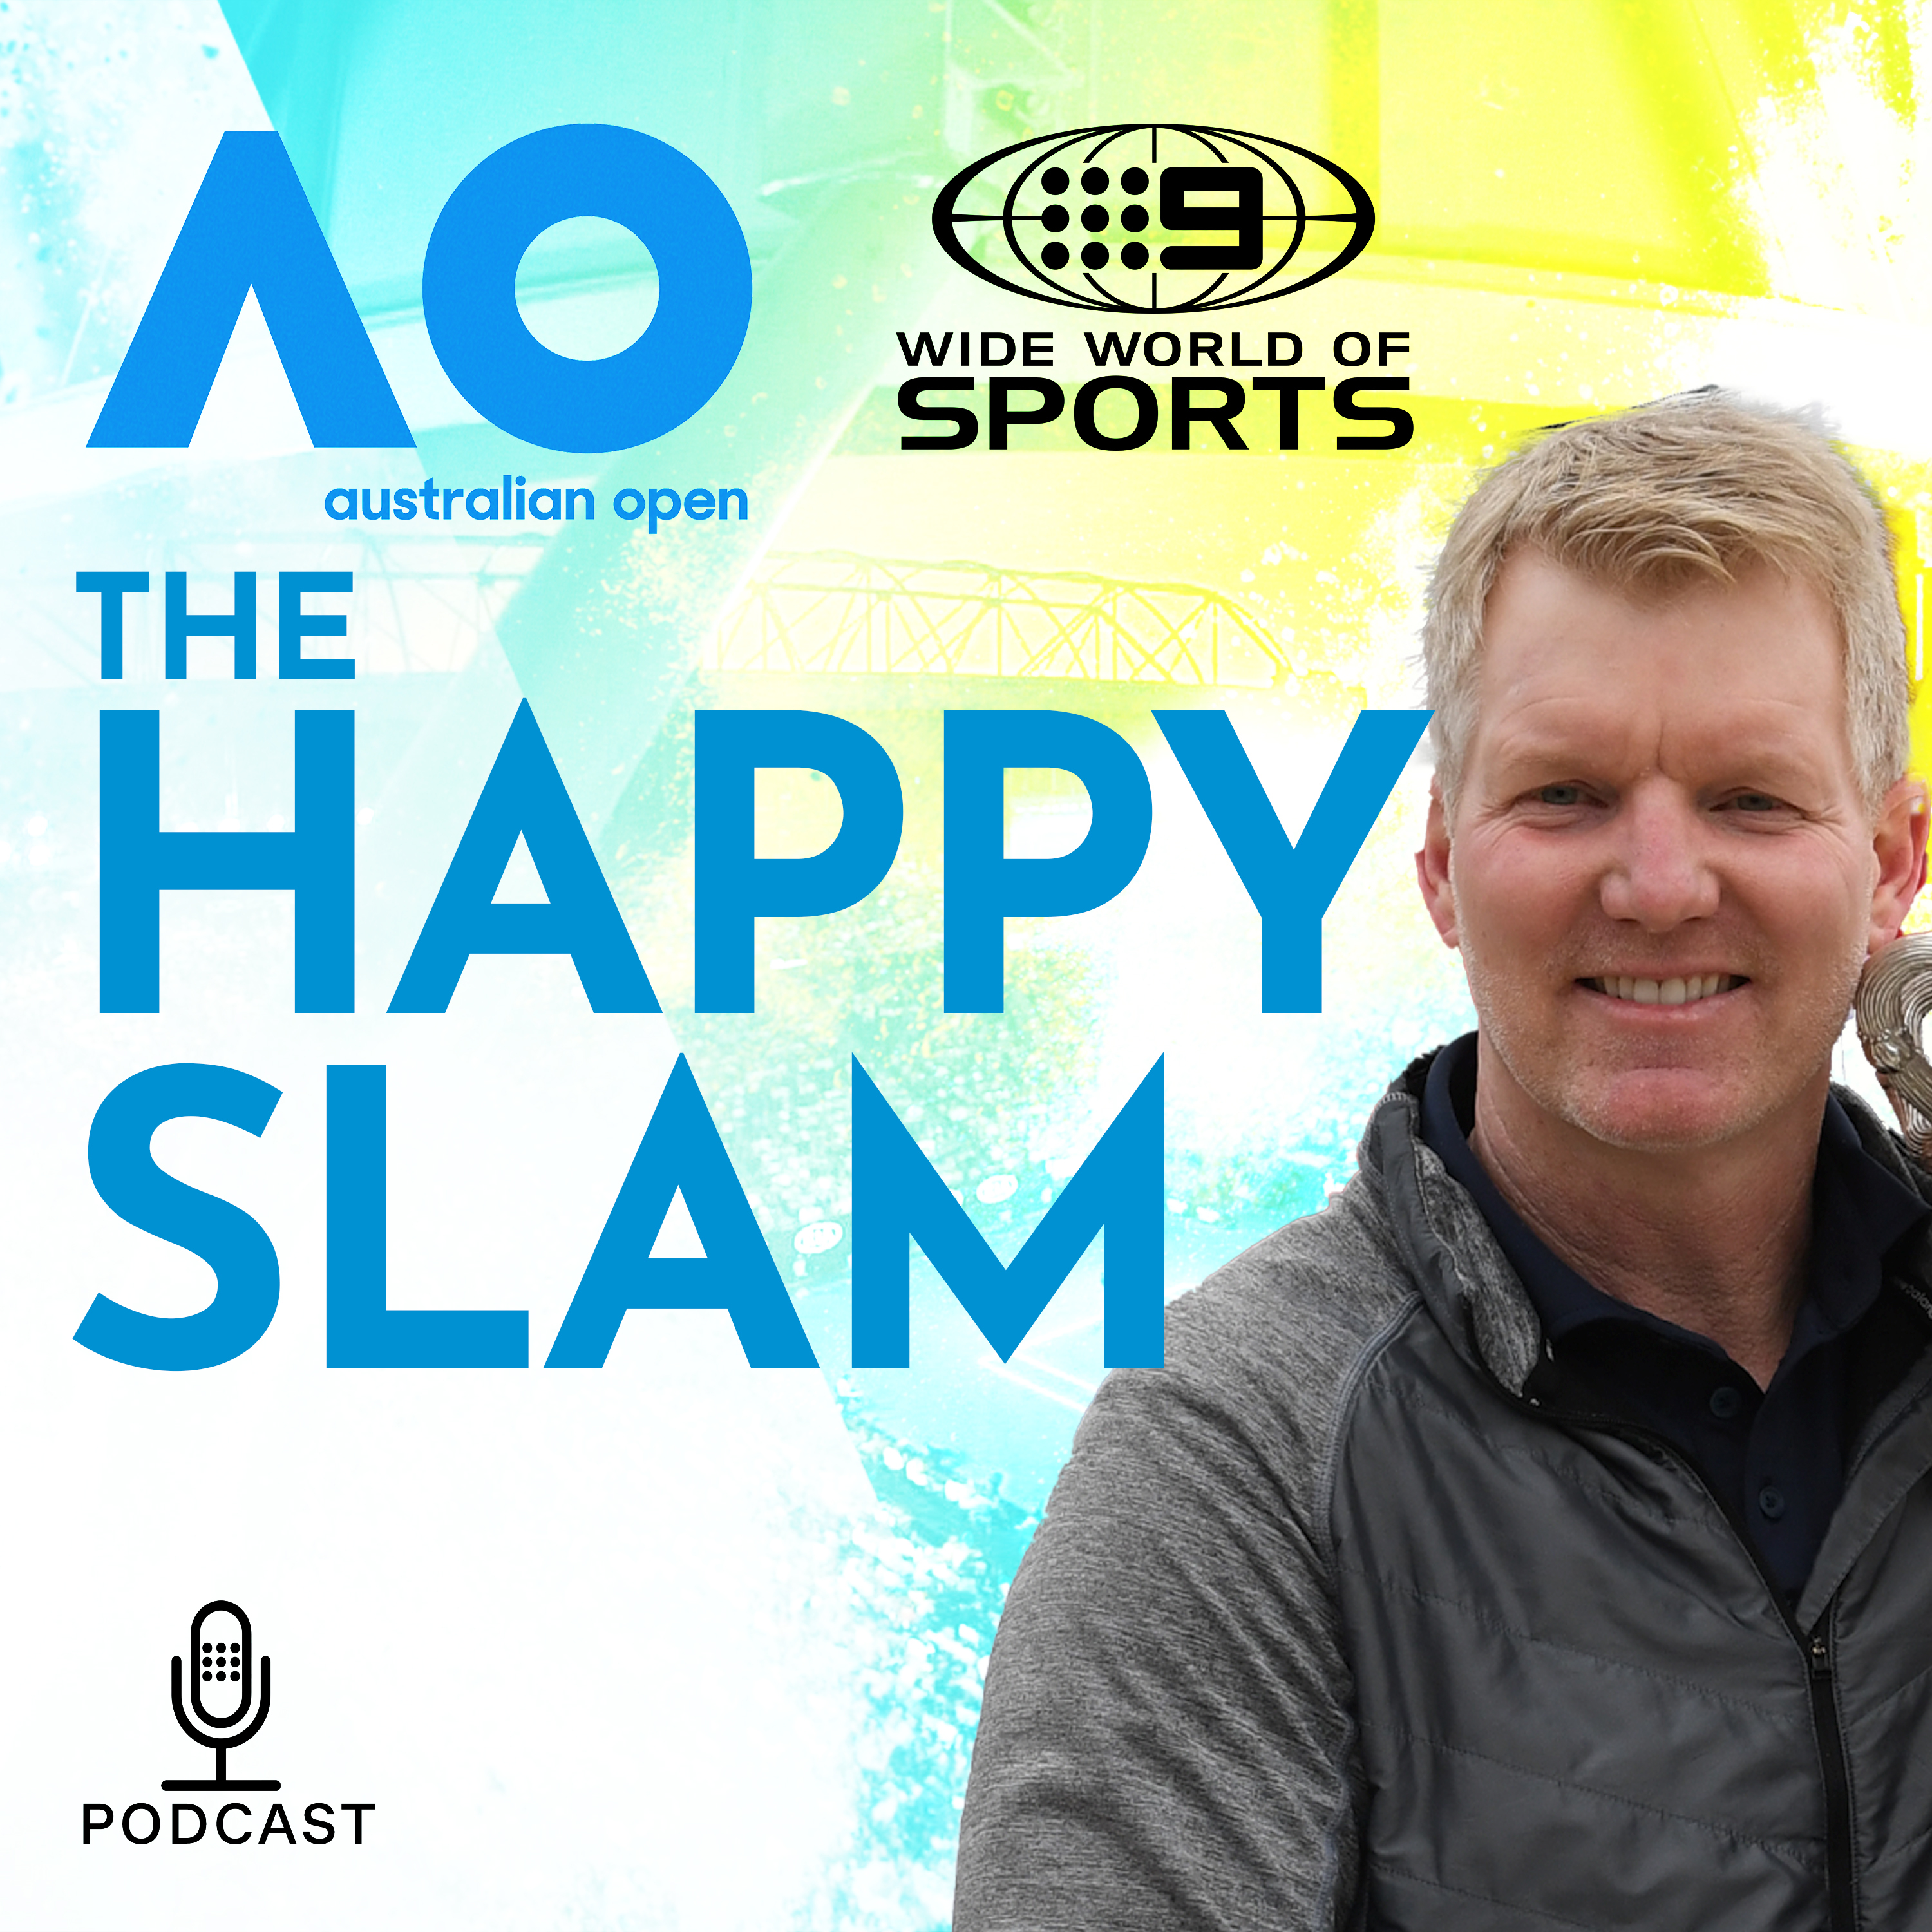 Jim Courier: The Adopted Aussie